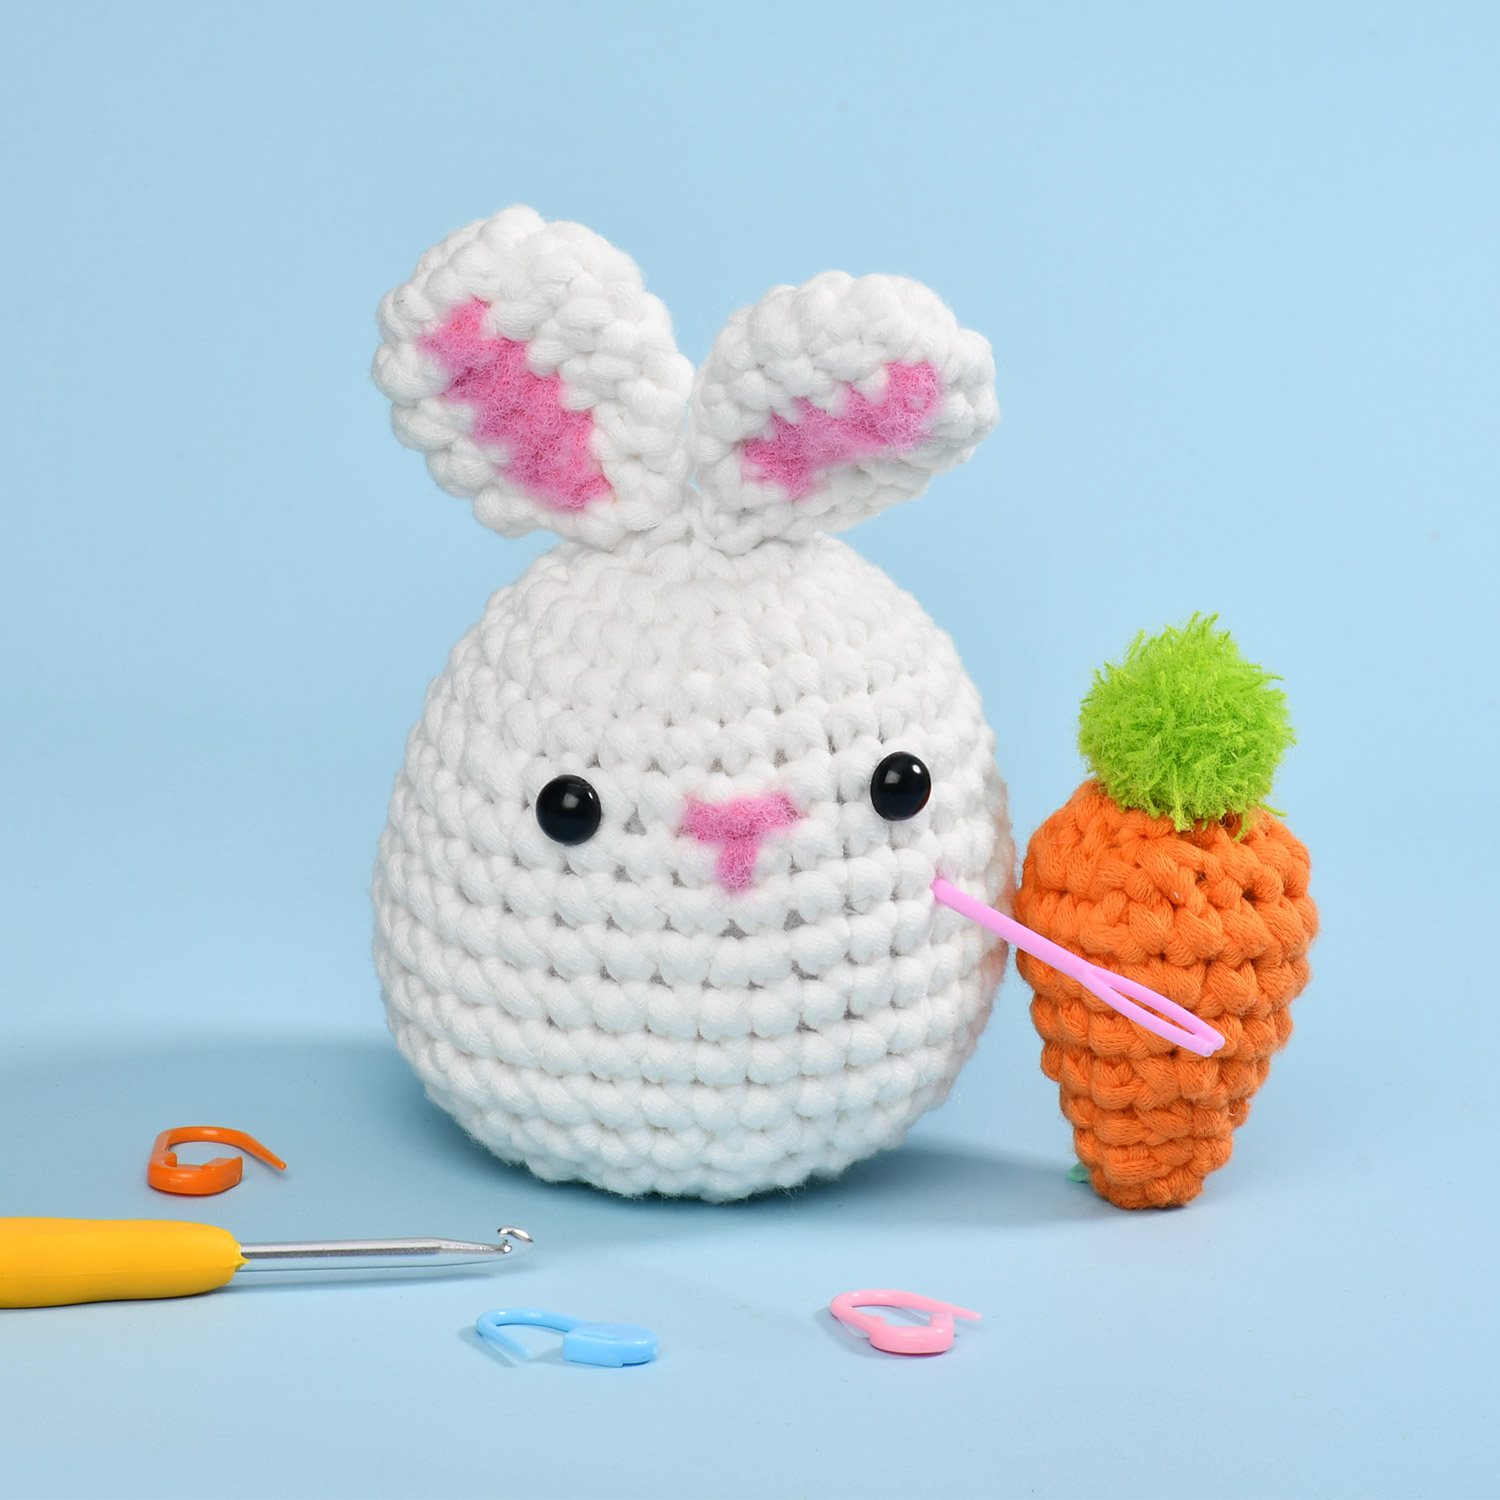 Rabbit Crochet Kits for Beginners - All-in-One Stuffed Animal Knitting Sets  - Step-by-Step Video Tutorials DIY, Crochet Kits for Easter